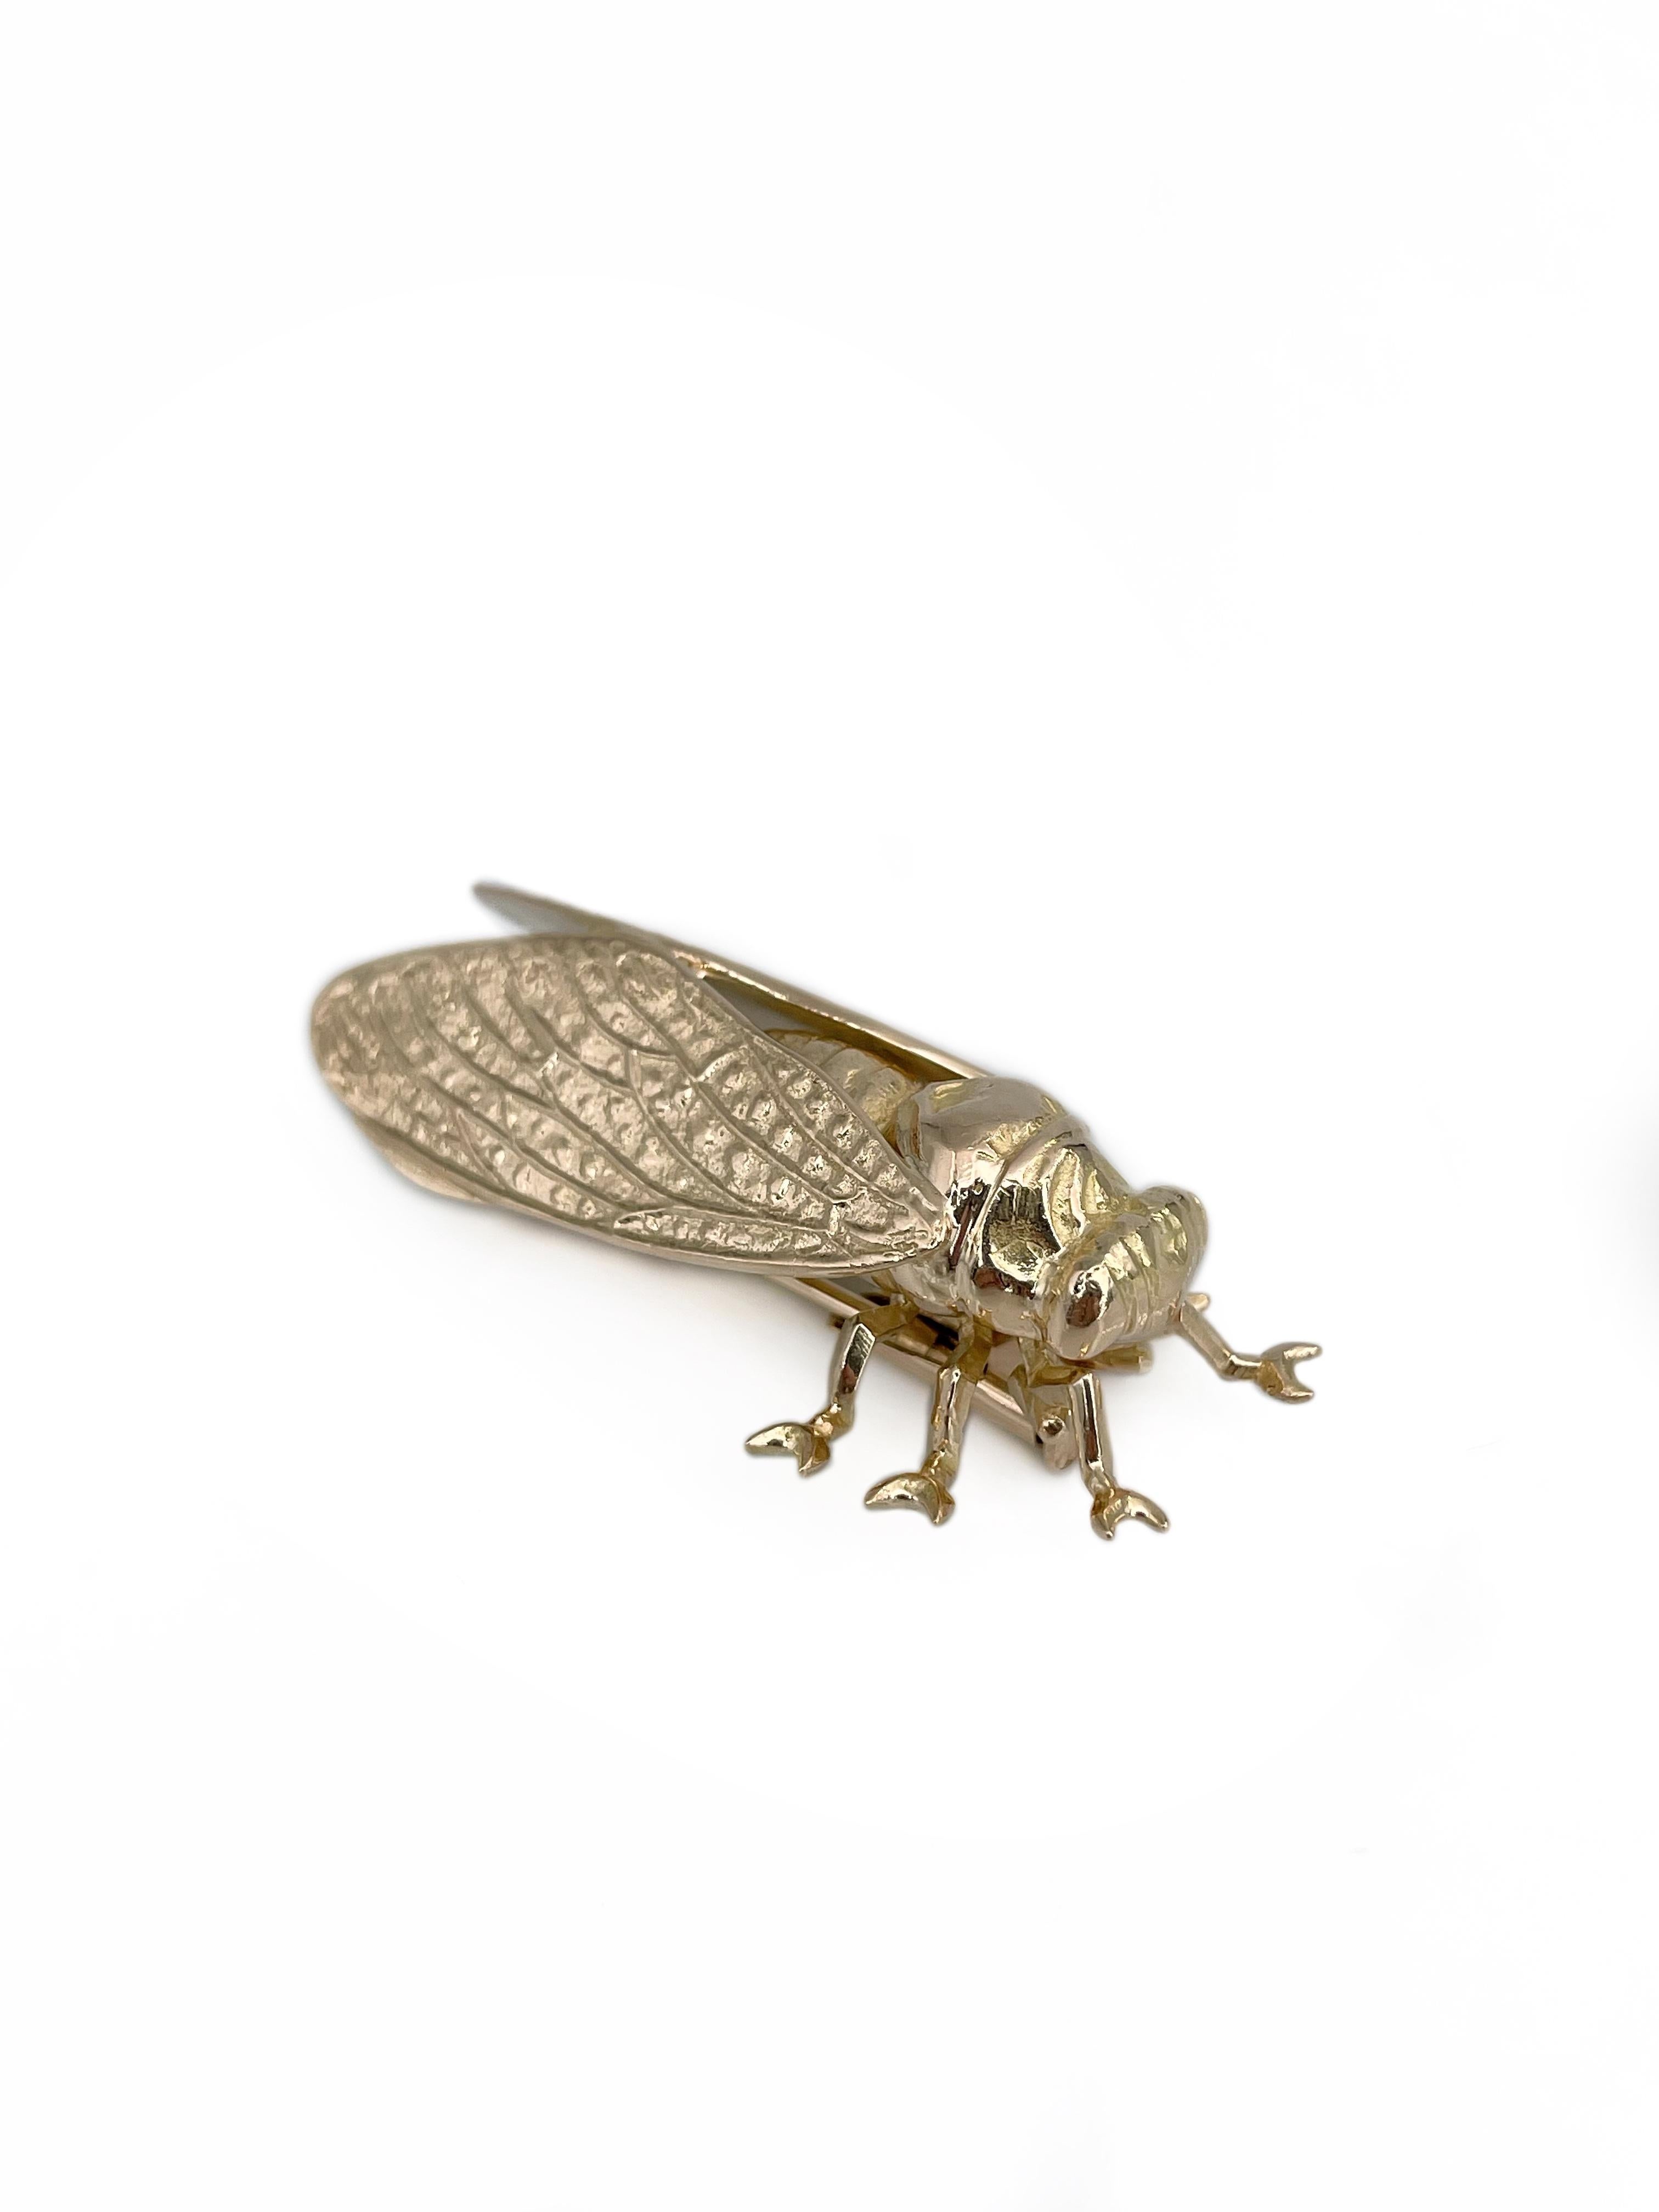 This is a vintage cicada shape pin brooch crafted in 18K yellow gold. Circa 1970.

Has a trombone clasp. 

Weight: 11.34g
Size: 4x1.5cm

———

If you have any questions, please feel free to ask. We describe our items accurately. Please note that in